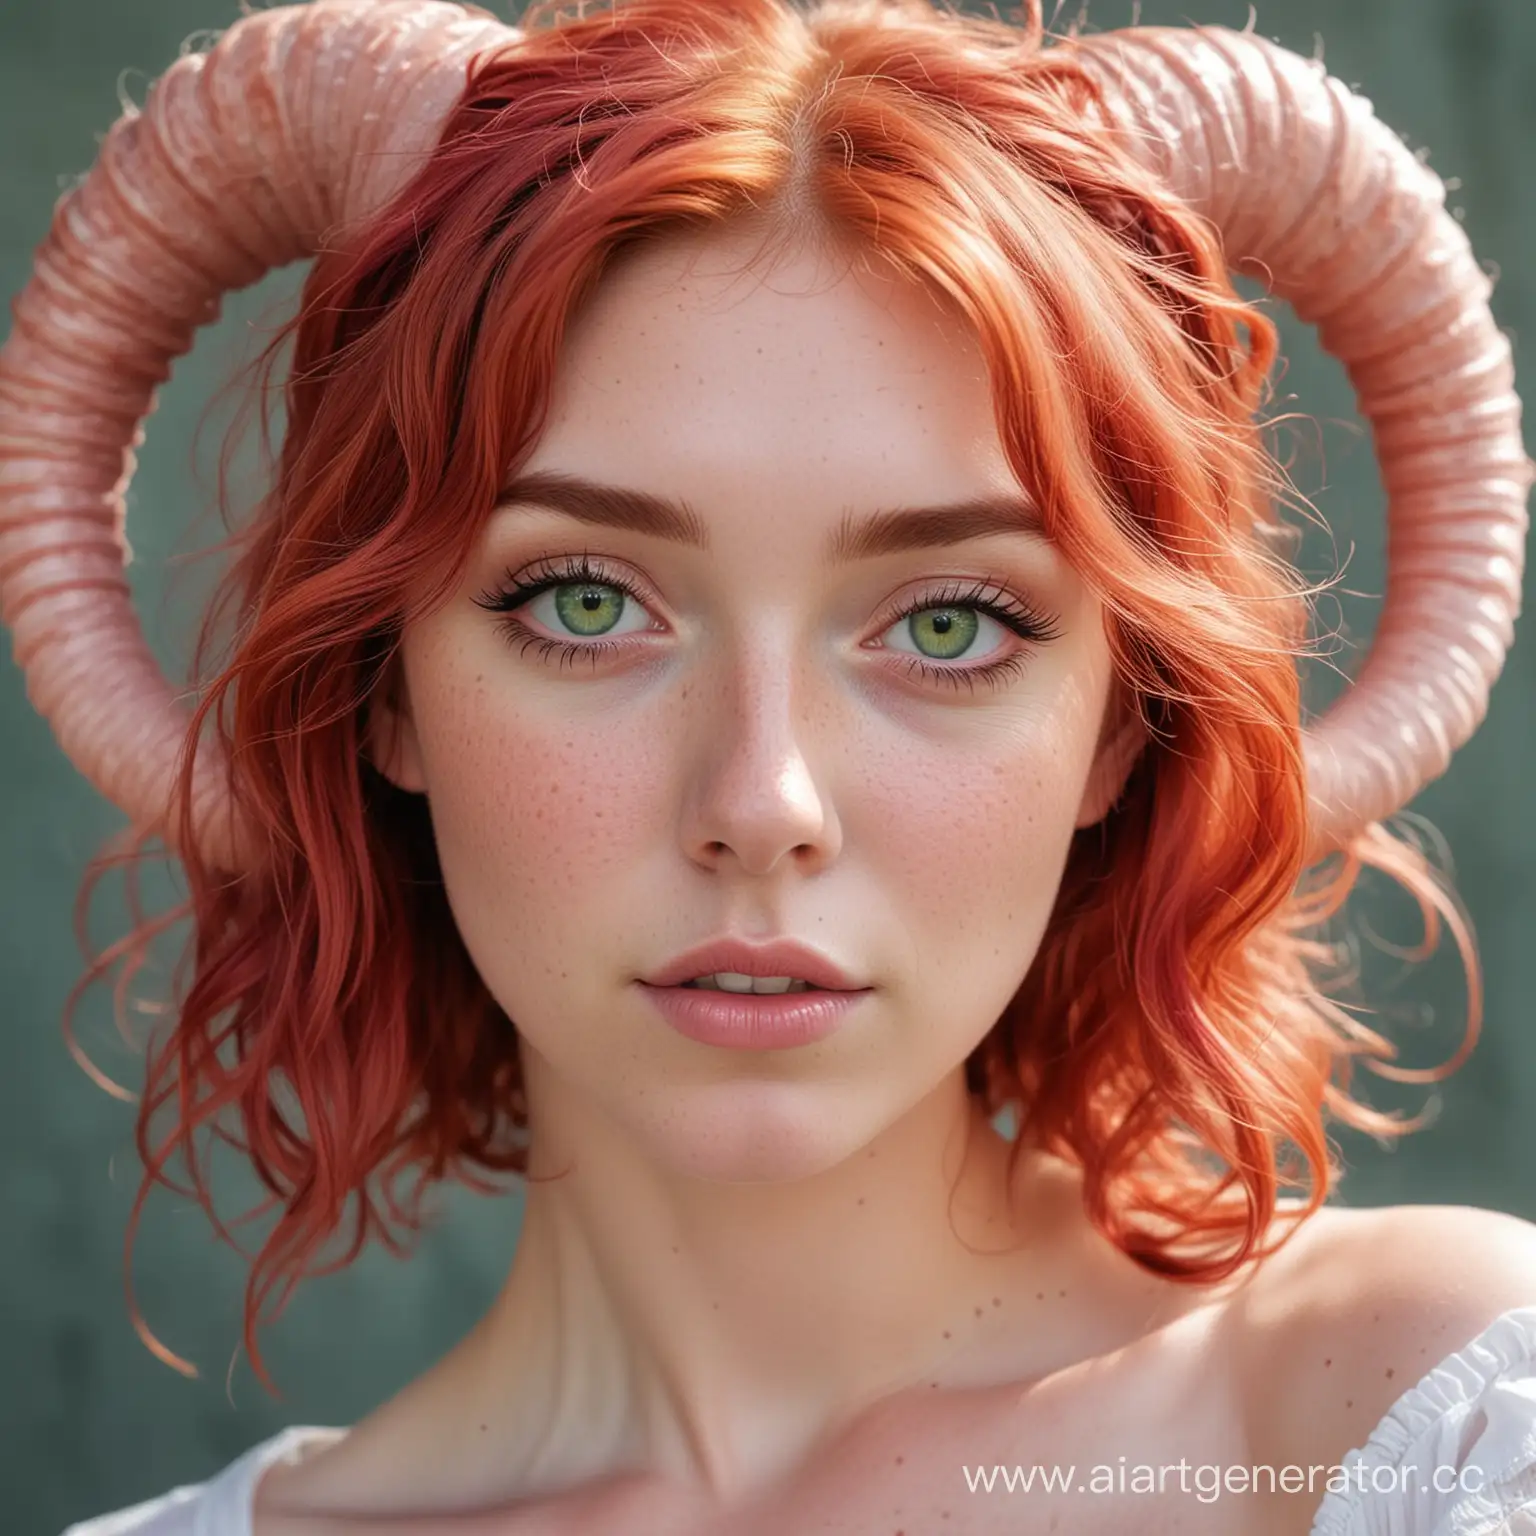 Enchanting-Girl-with-Spiral-Horns-and-Red-Hair-in-Whimsical-Fantasy-Portrait